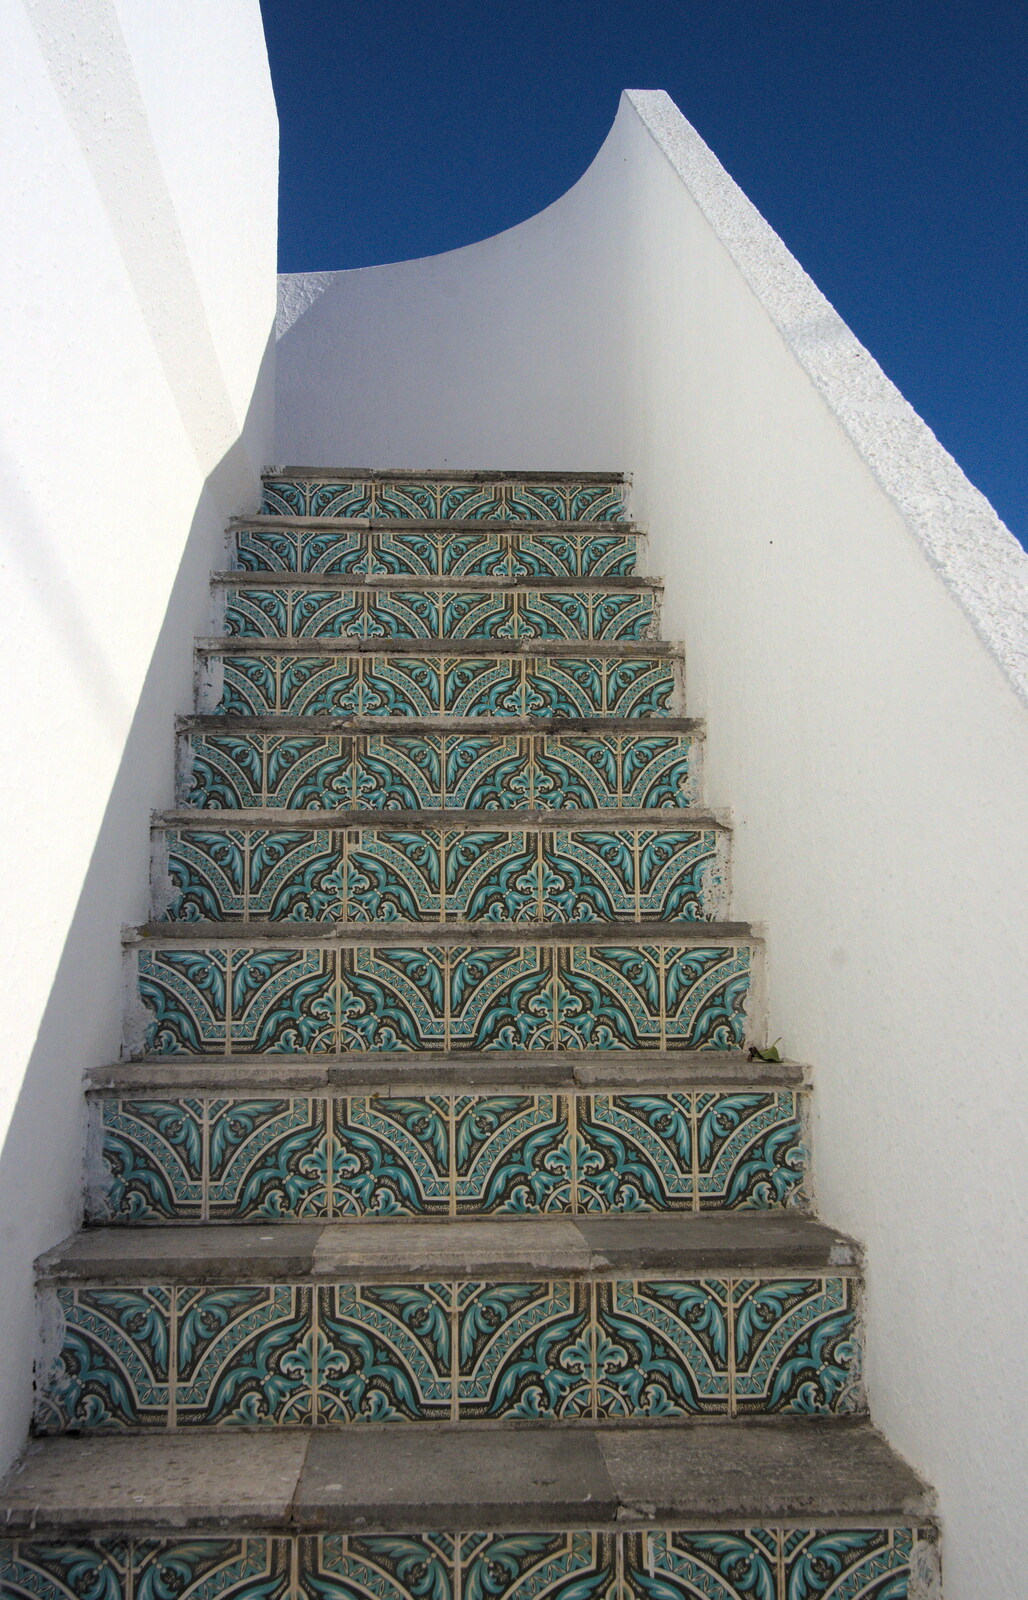 Steps to the sky from Gary and Vanessa's Barbeque, Alcantarilha, Algarve, Portugal - 7th April 2016